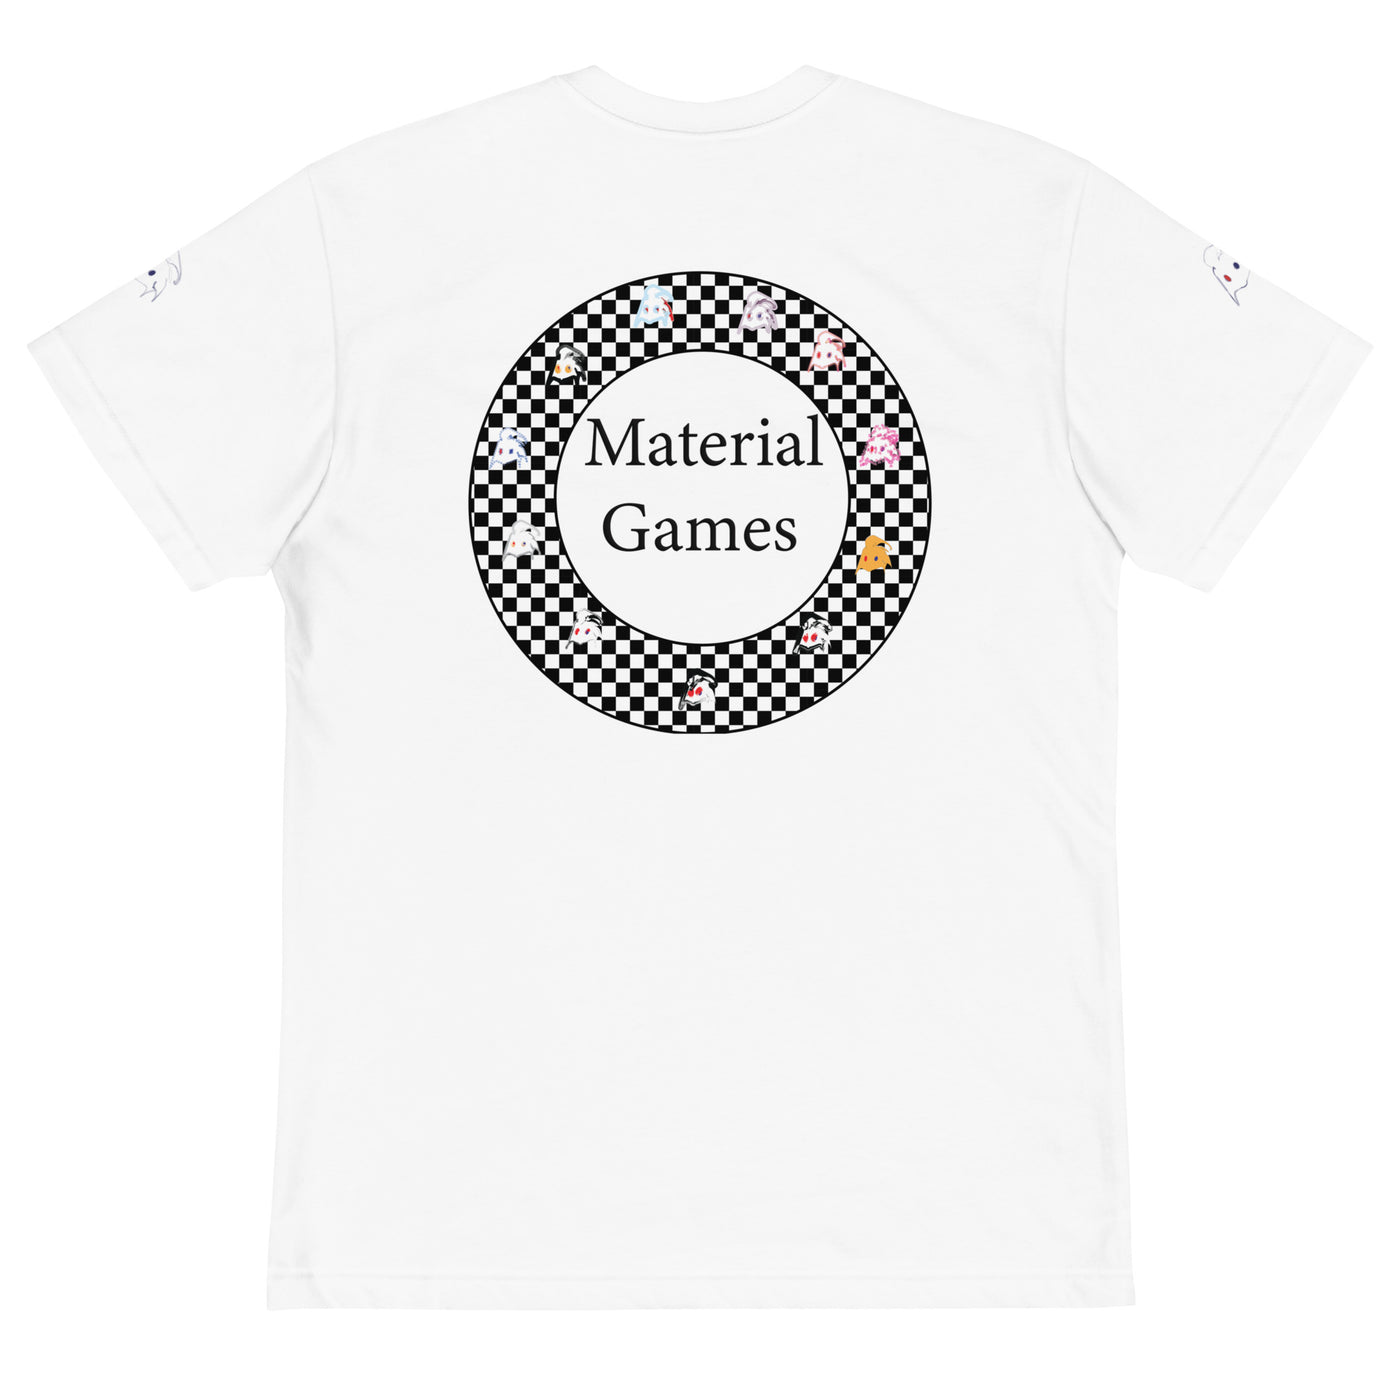 Material Games (If you know, You Know) Vintage tee